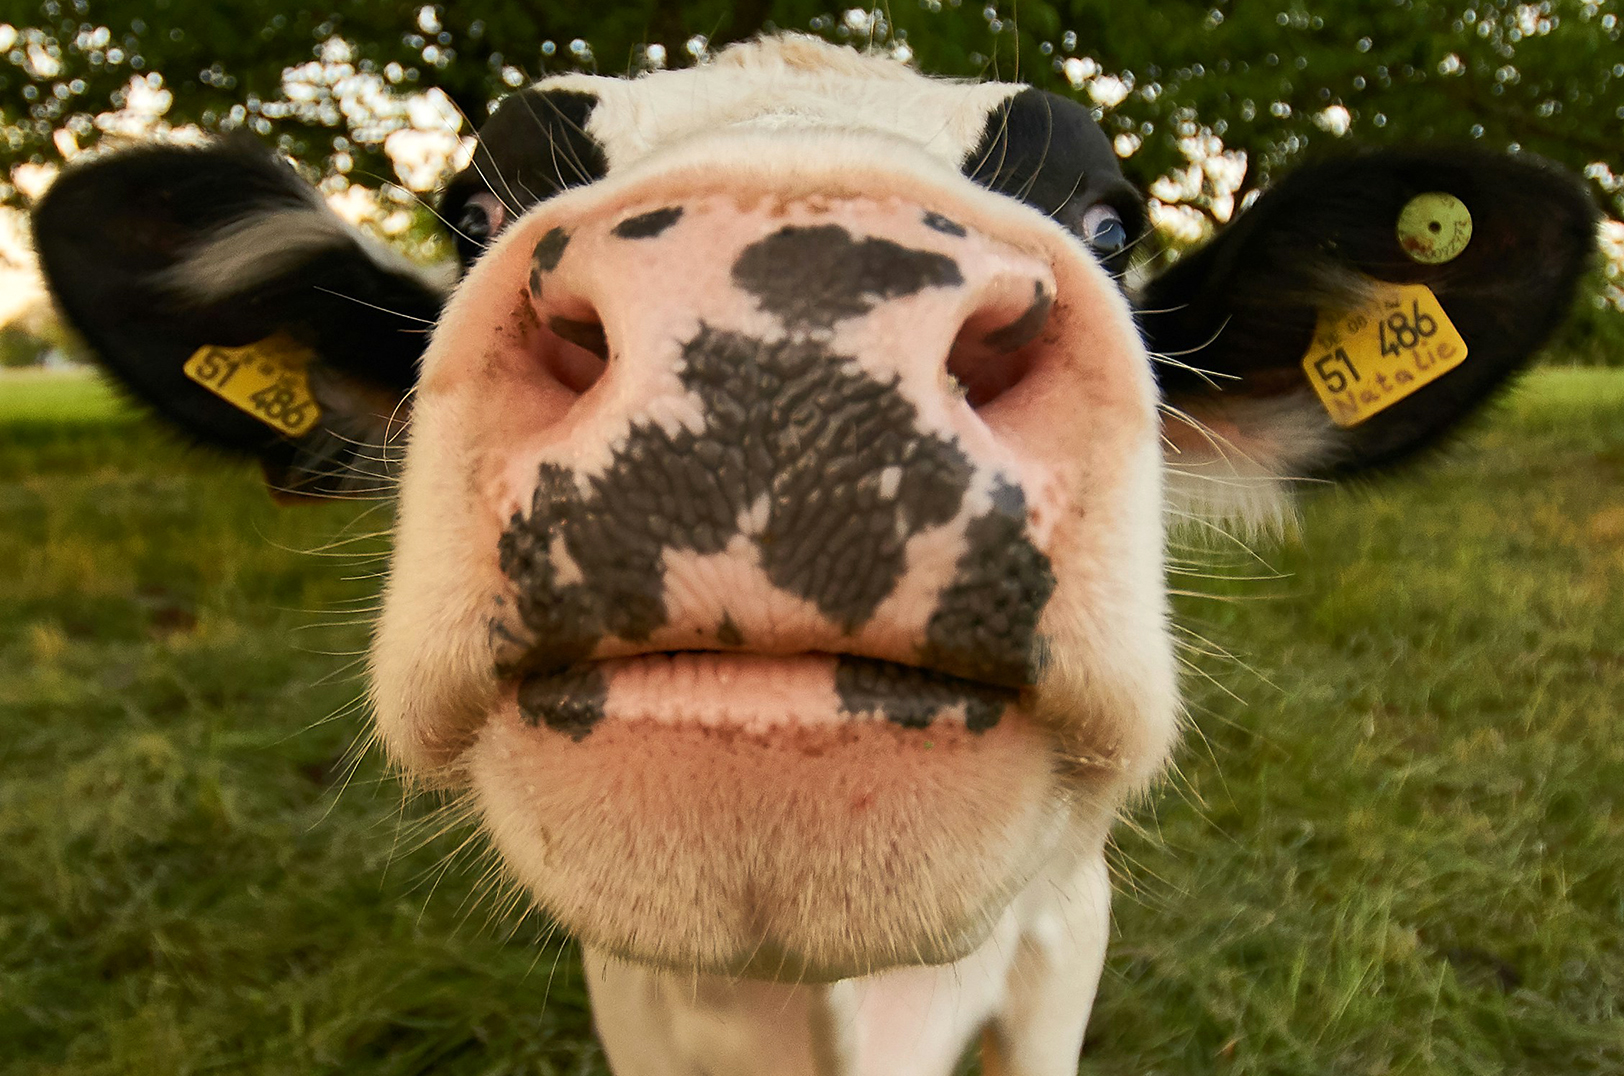 Study with USDA researchers affirms startup’s AI-powered facial recognition for cows can detect sick animals